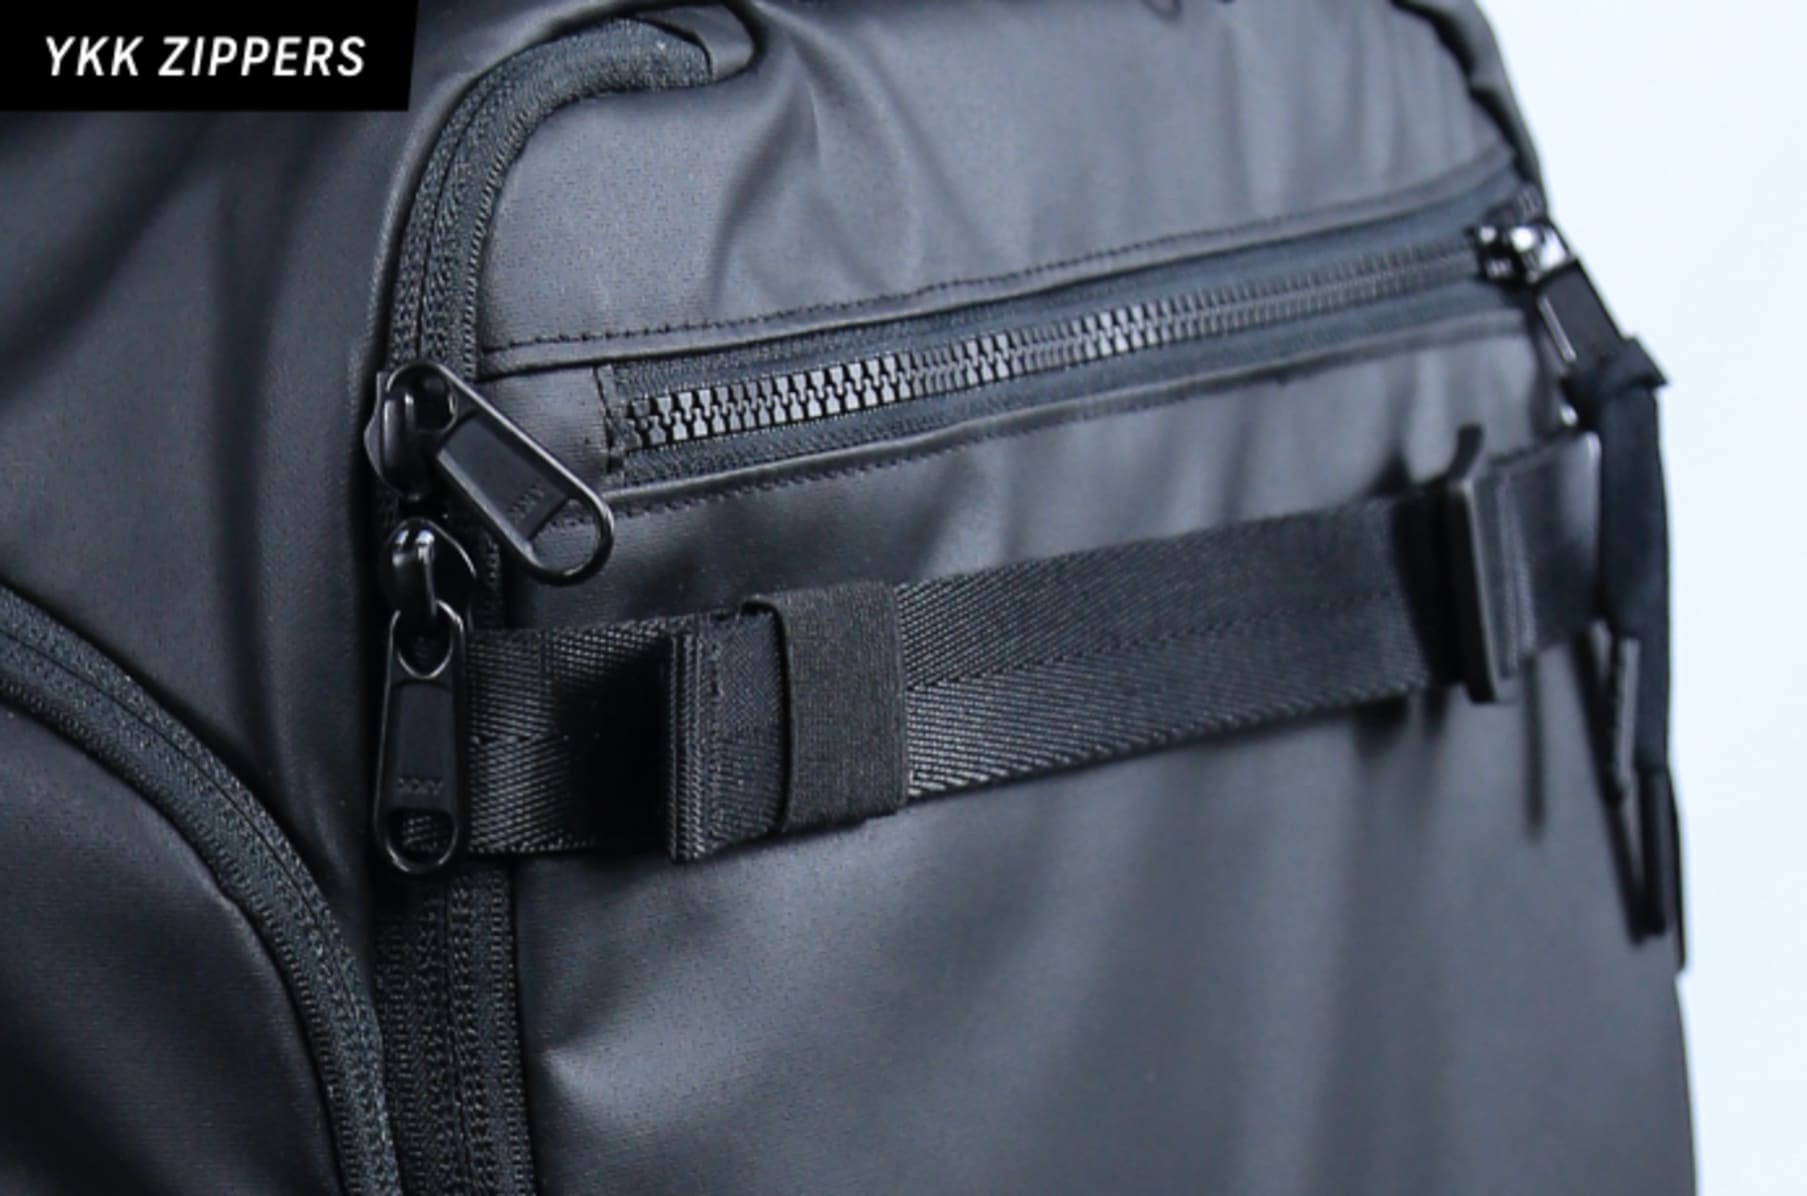 Our newest anti-theft innovation, Self-Locking Zippers., bag, innovation,  zipper